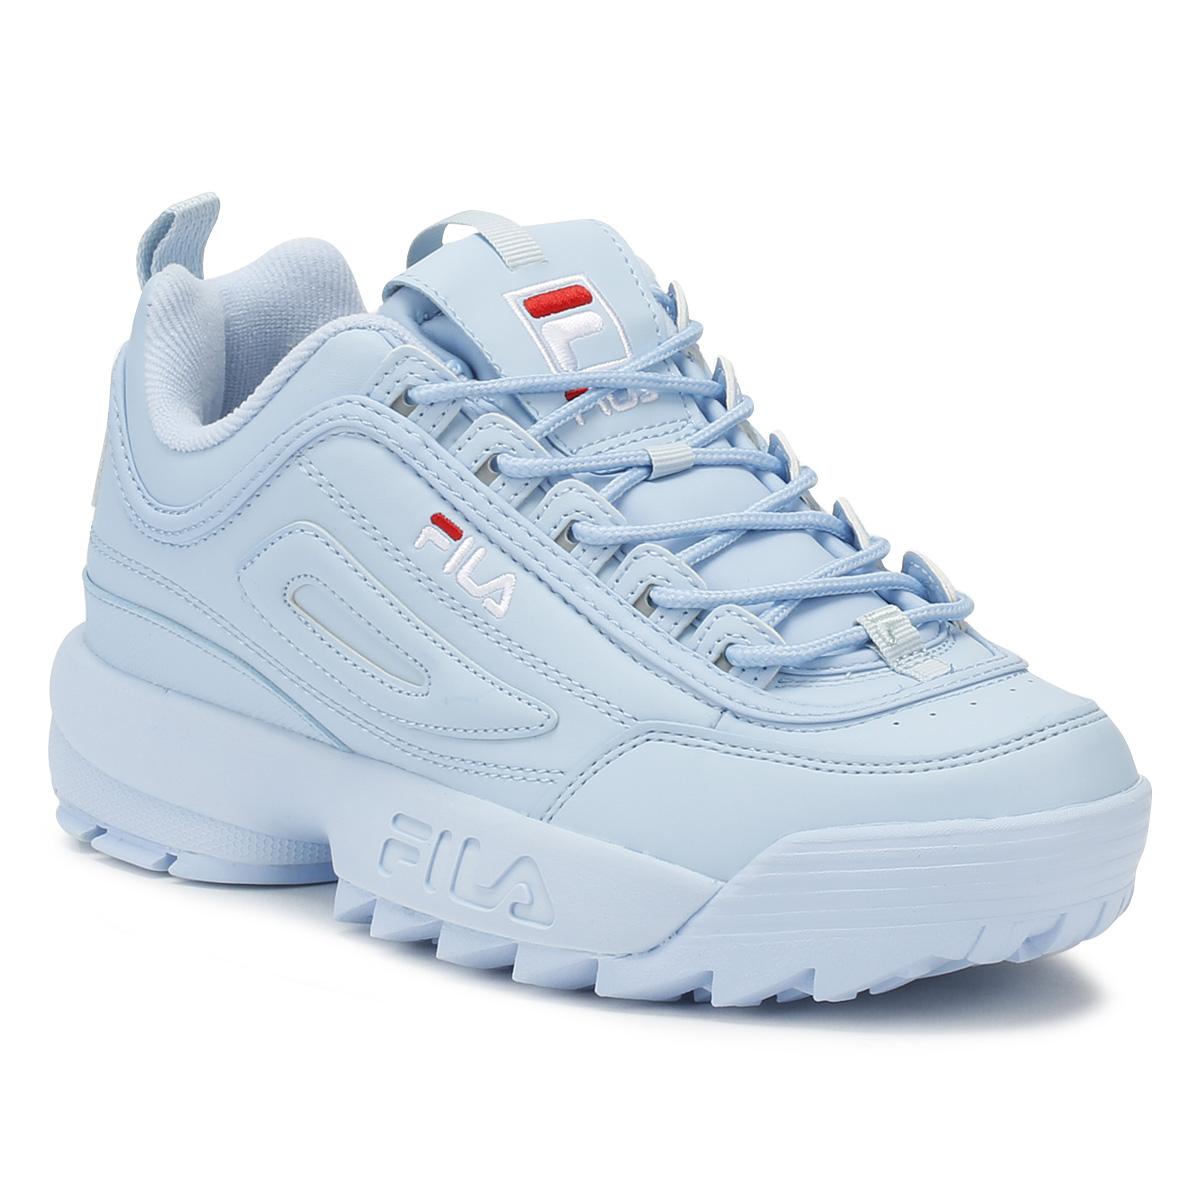 Buy > blue fila trainers > in stock